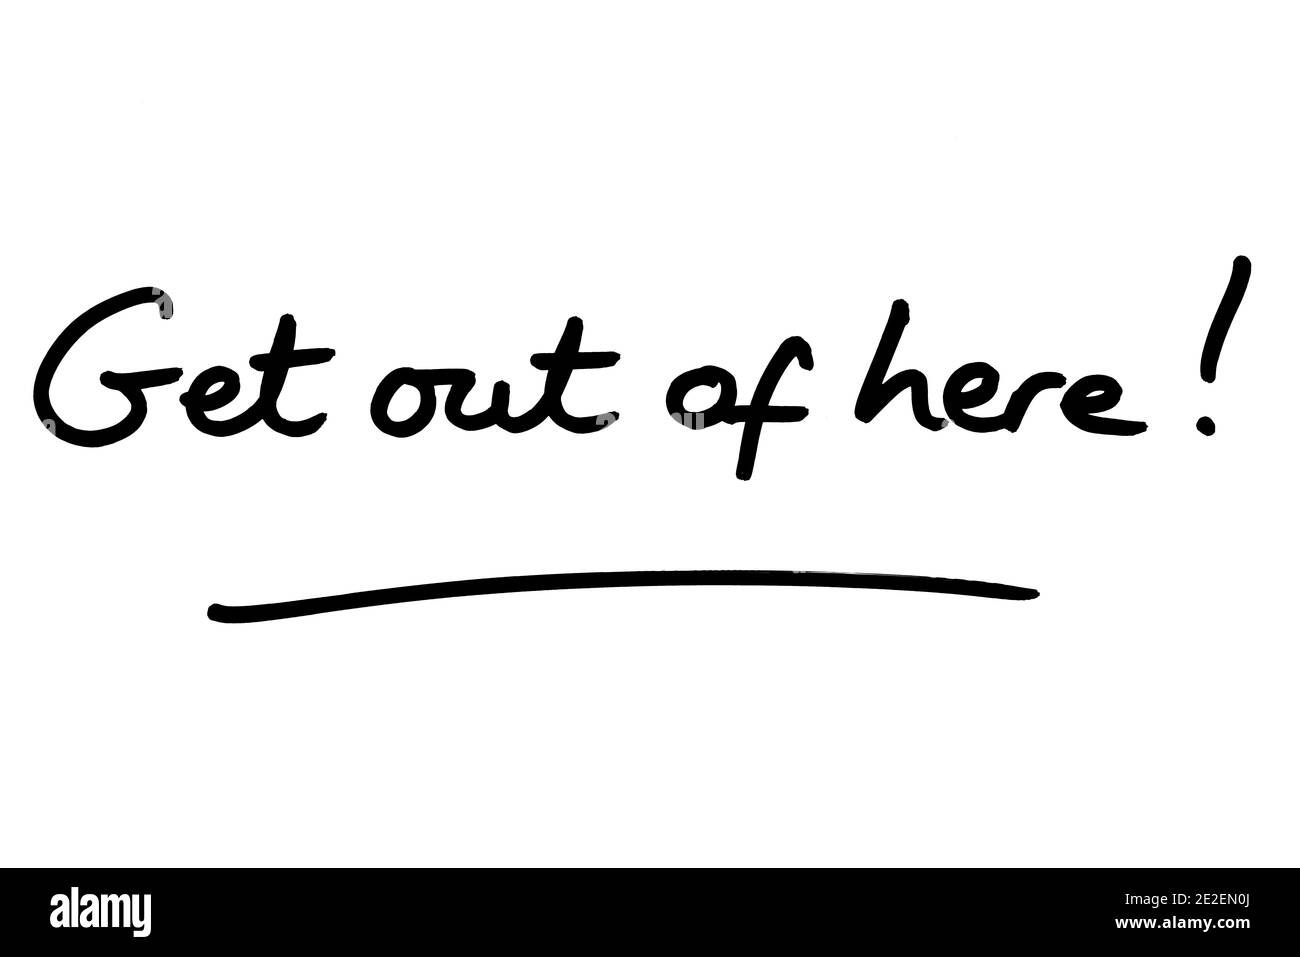 Get out of here! handwritten on a white background. Stock Photo